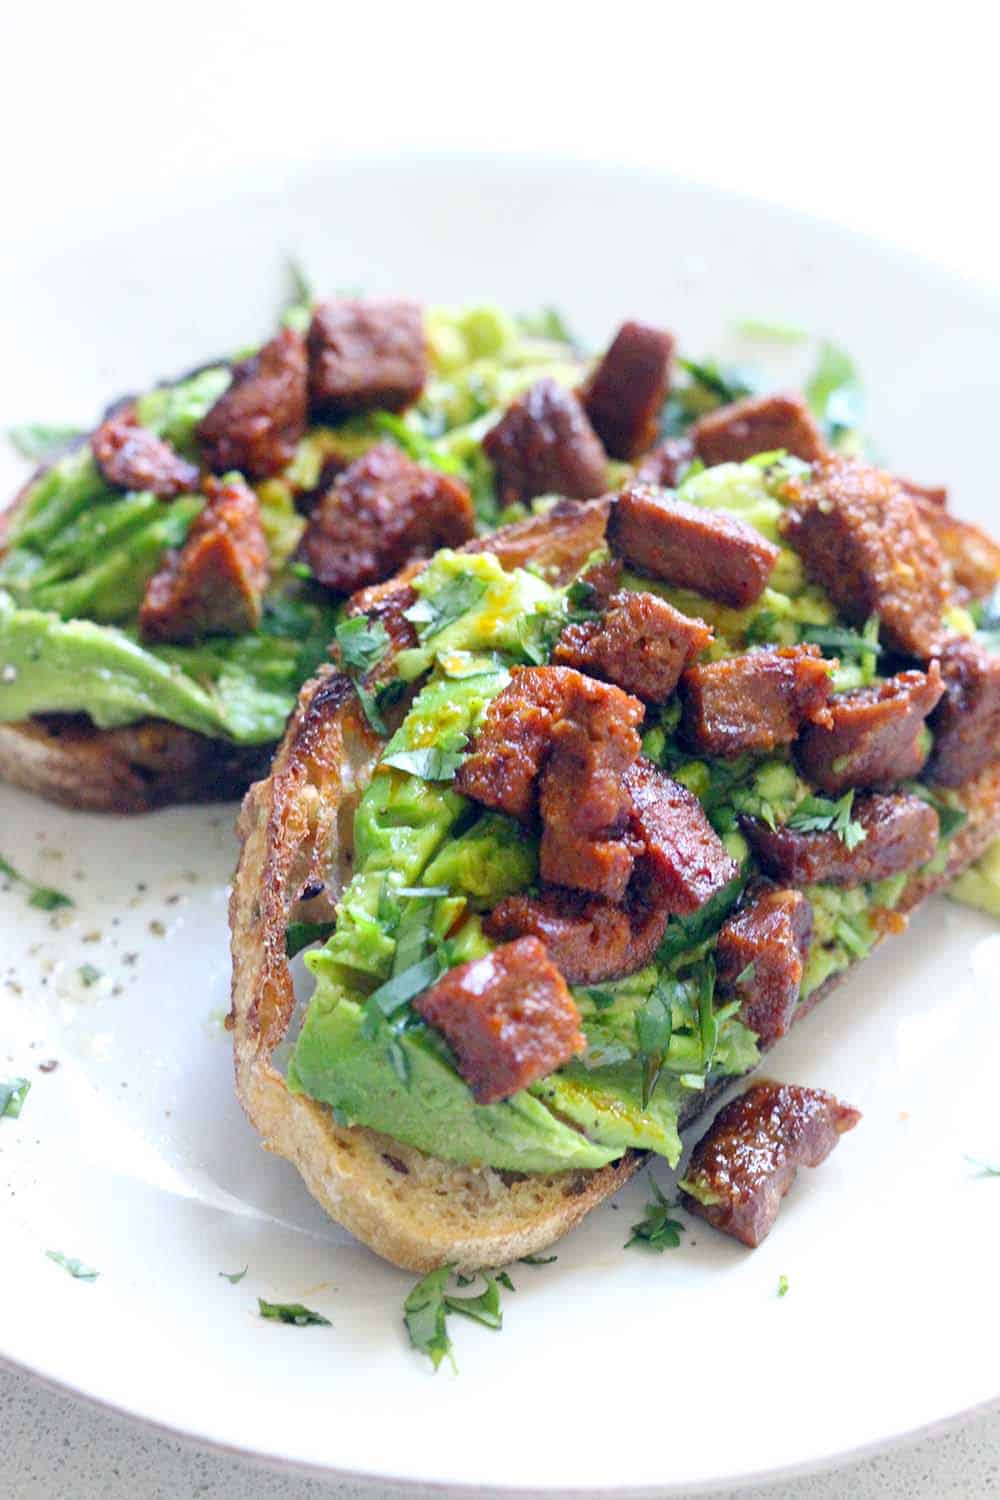 AVOCADO TOAST IS AMAZING!!! This version has spicy and smoky chorizo on top, and is seasoned with fresh lime juice, garlic, and cilantro. Good for breakfast, lunch, or dinner, and only takes FIVE MINUTES to make!